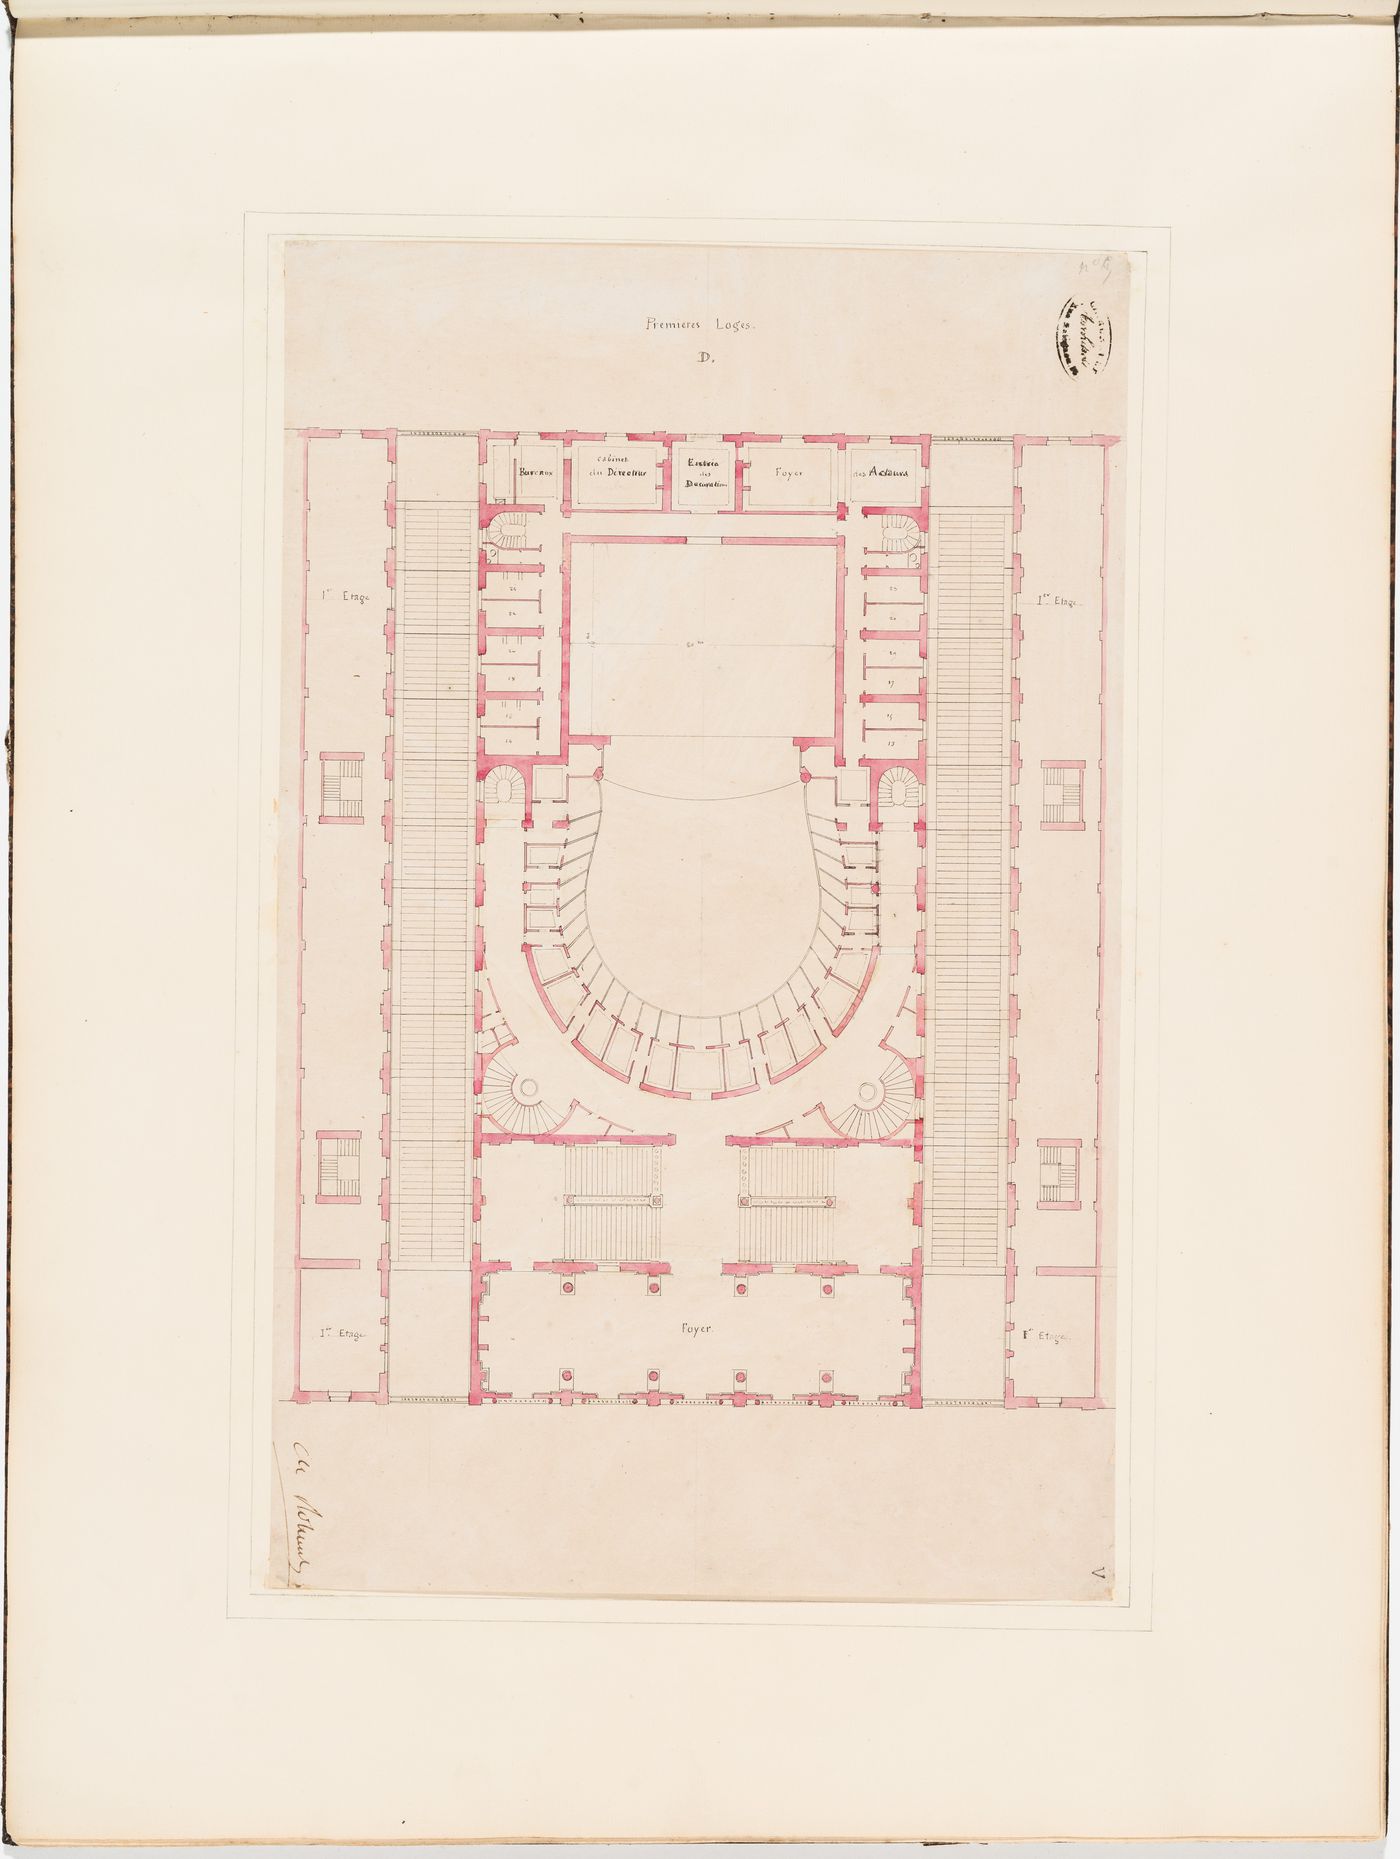 Plan for the "premières loges" for level D for the Théâtre Royal Italien, and two first floor plans of the adjacent shopping arcades